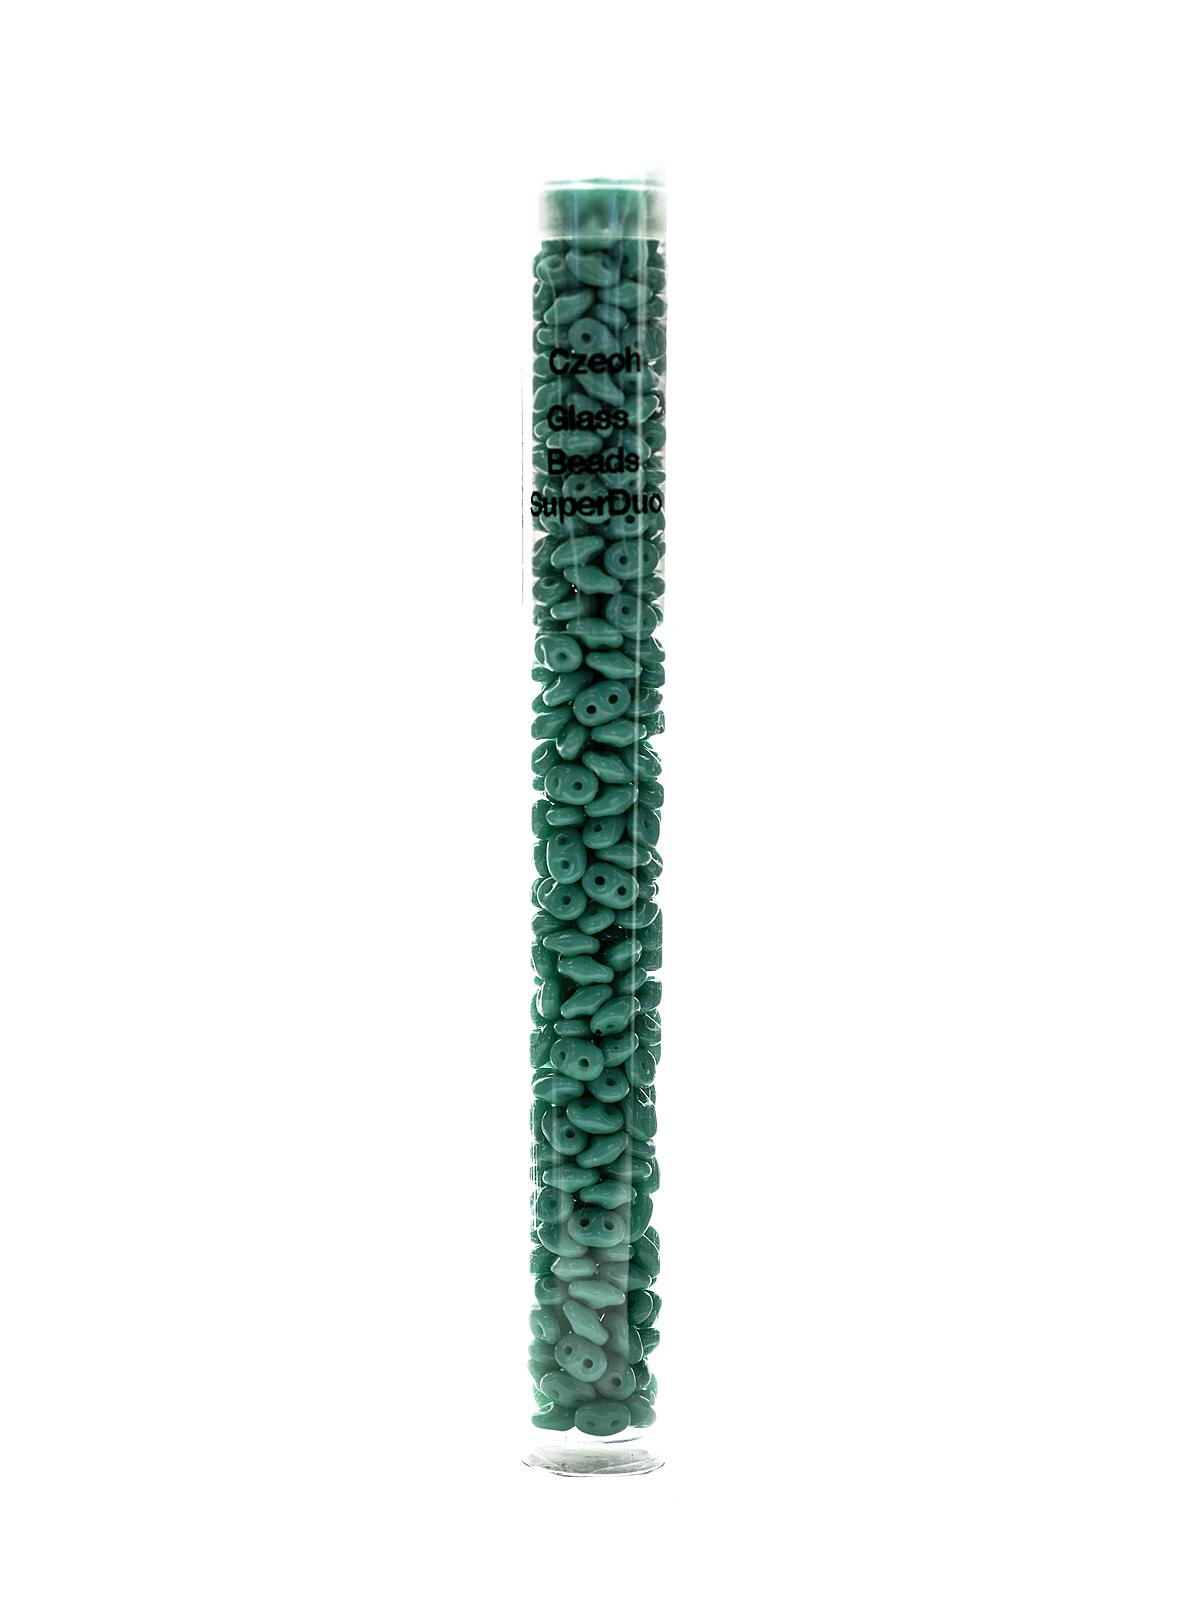 Super Duo Beads Turquoise Green 2.5 Mm X 5 Mm 24 Gm Tube